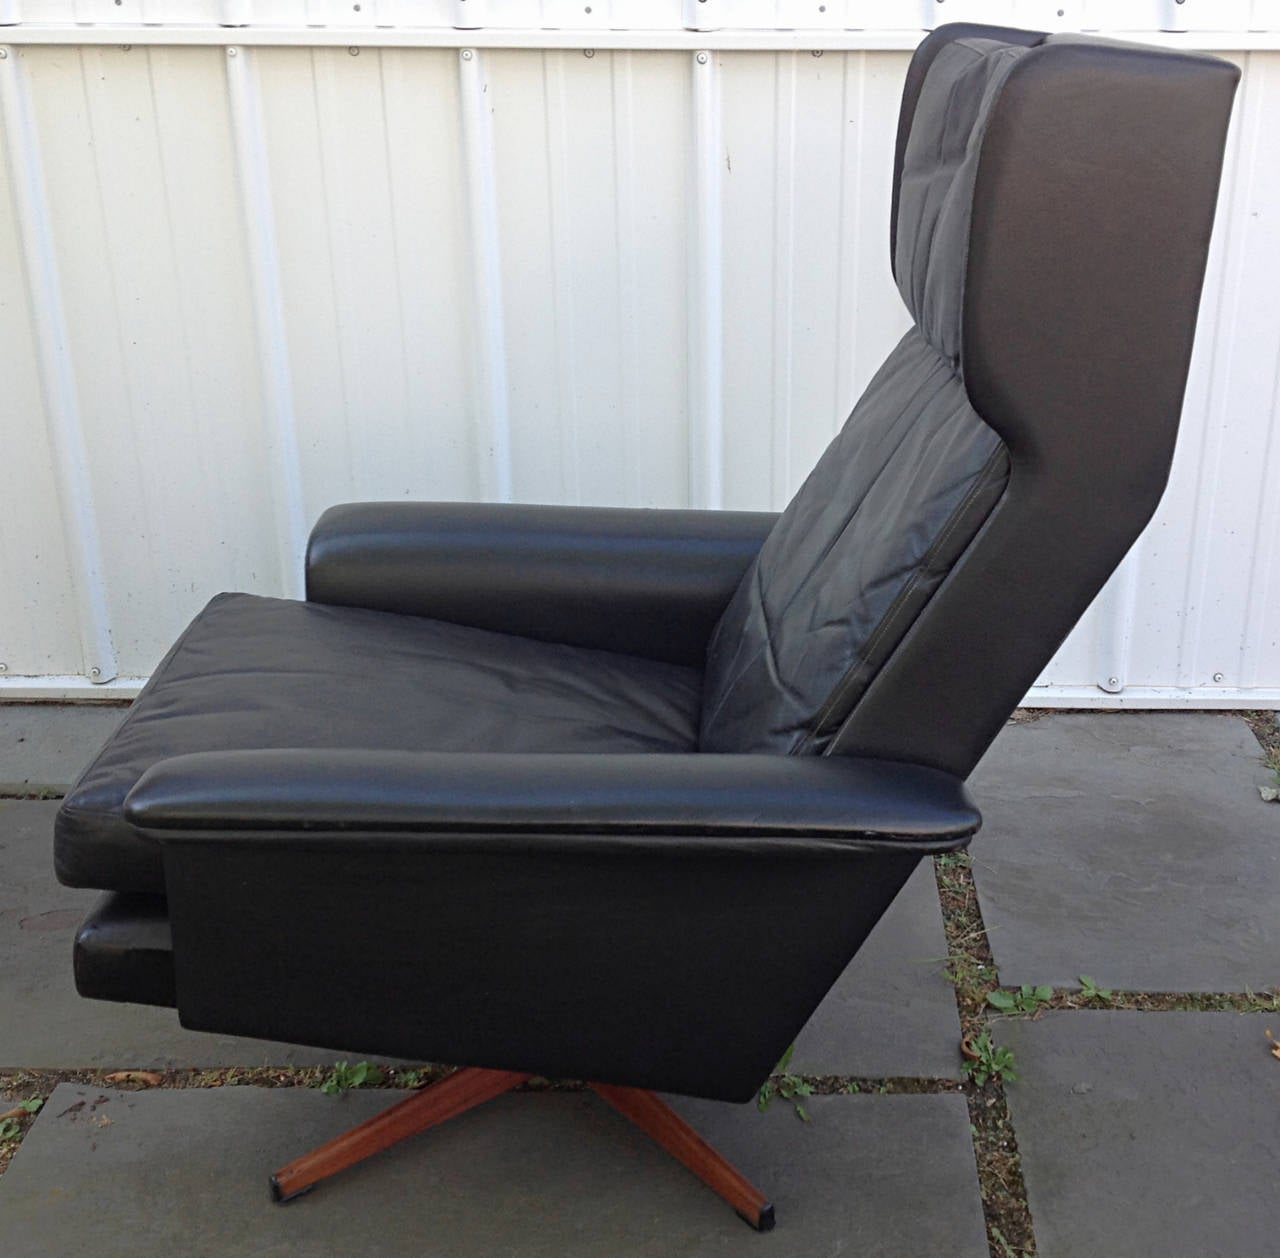 Danish wing back swivel lounge chair in black leather with faux rosewood four point metal base. Leather cushions are nicely broken in. Some abrasions to leather on outside edge of arms consistent with age and use.